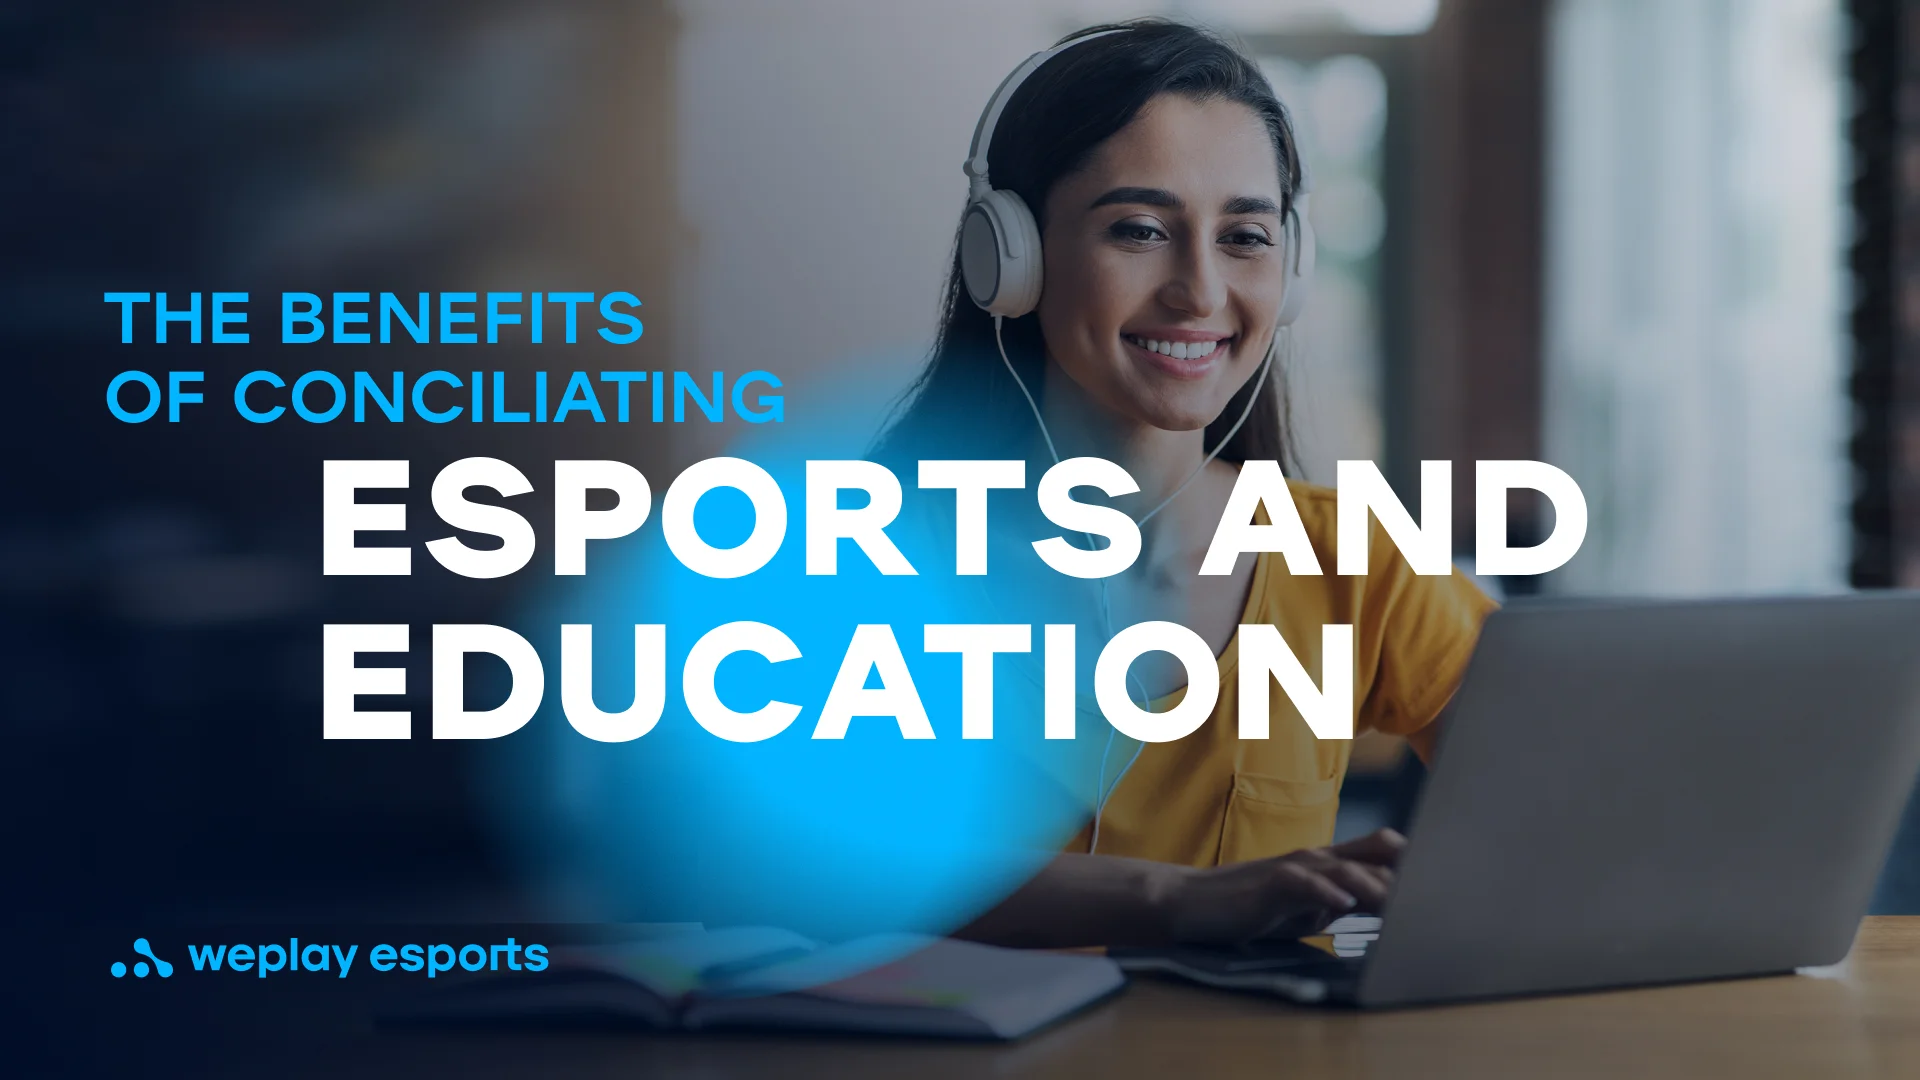 Why esports should be in schools the benefits of conciliating esports and education